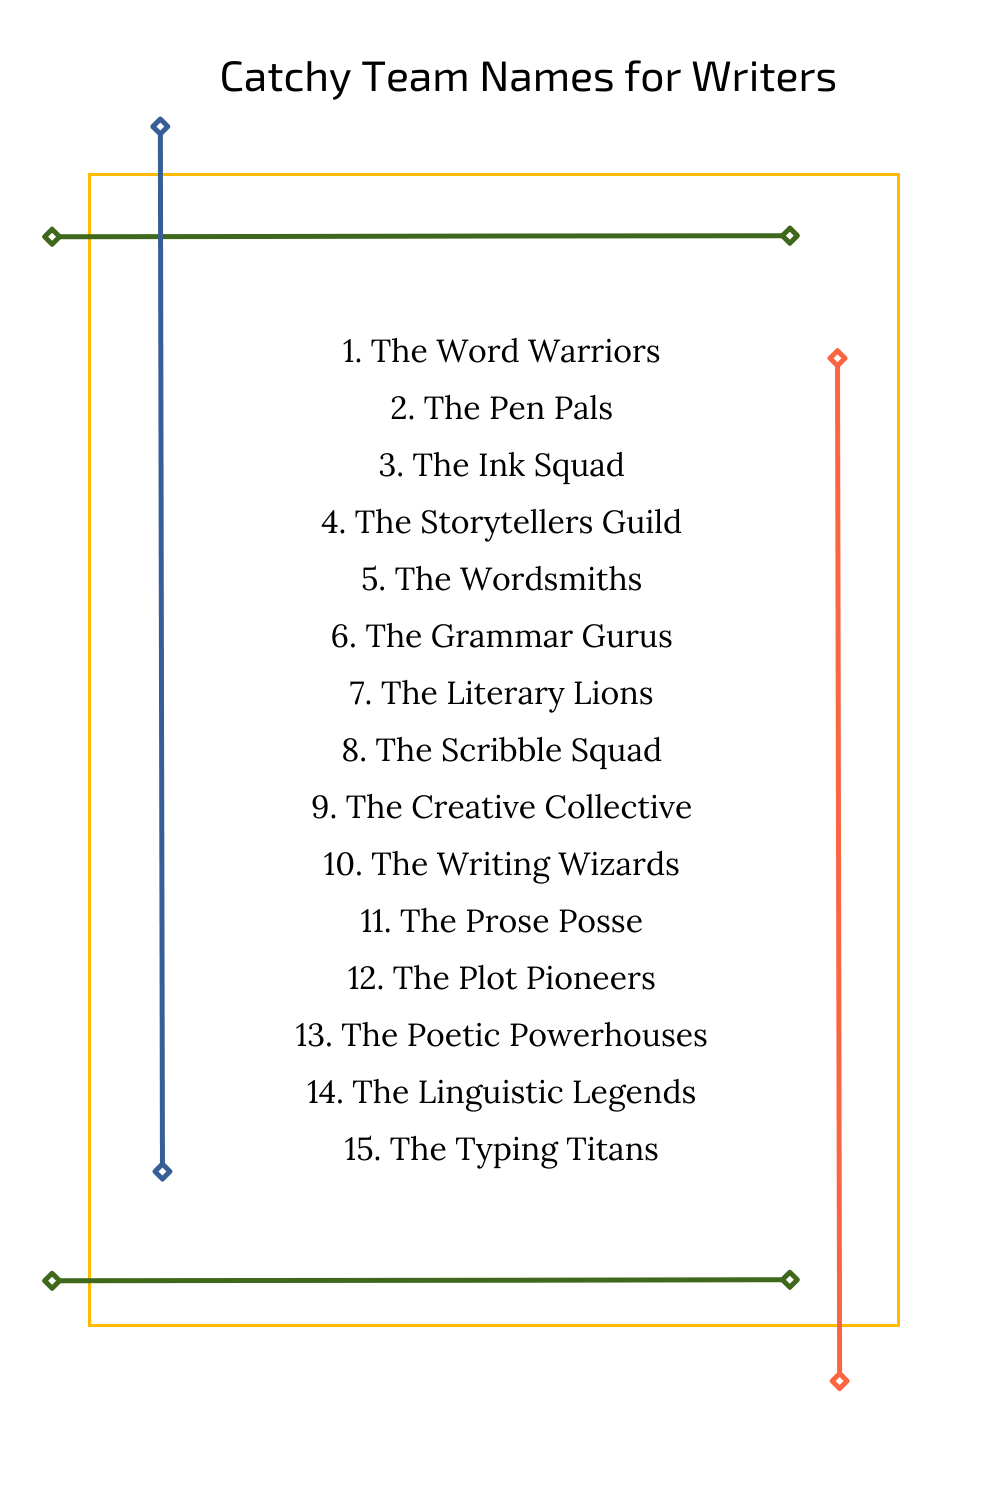 Catchy Team Names for Writers